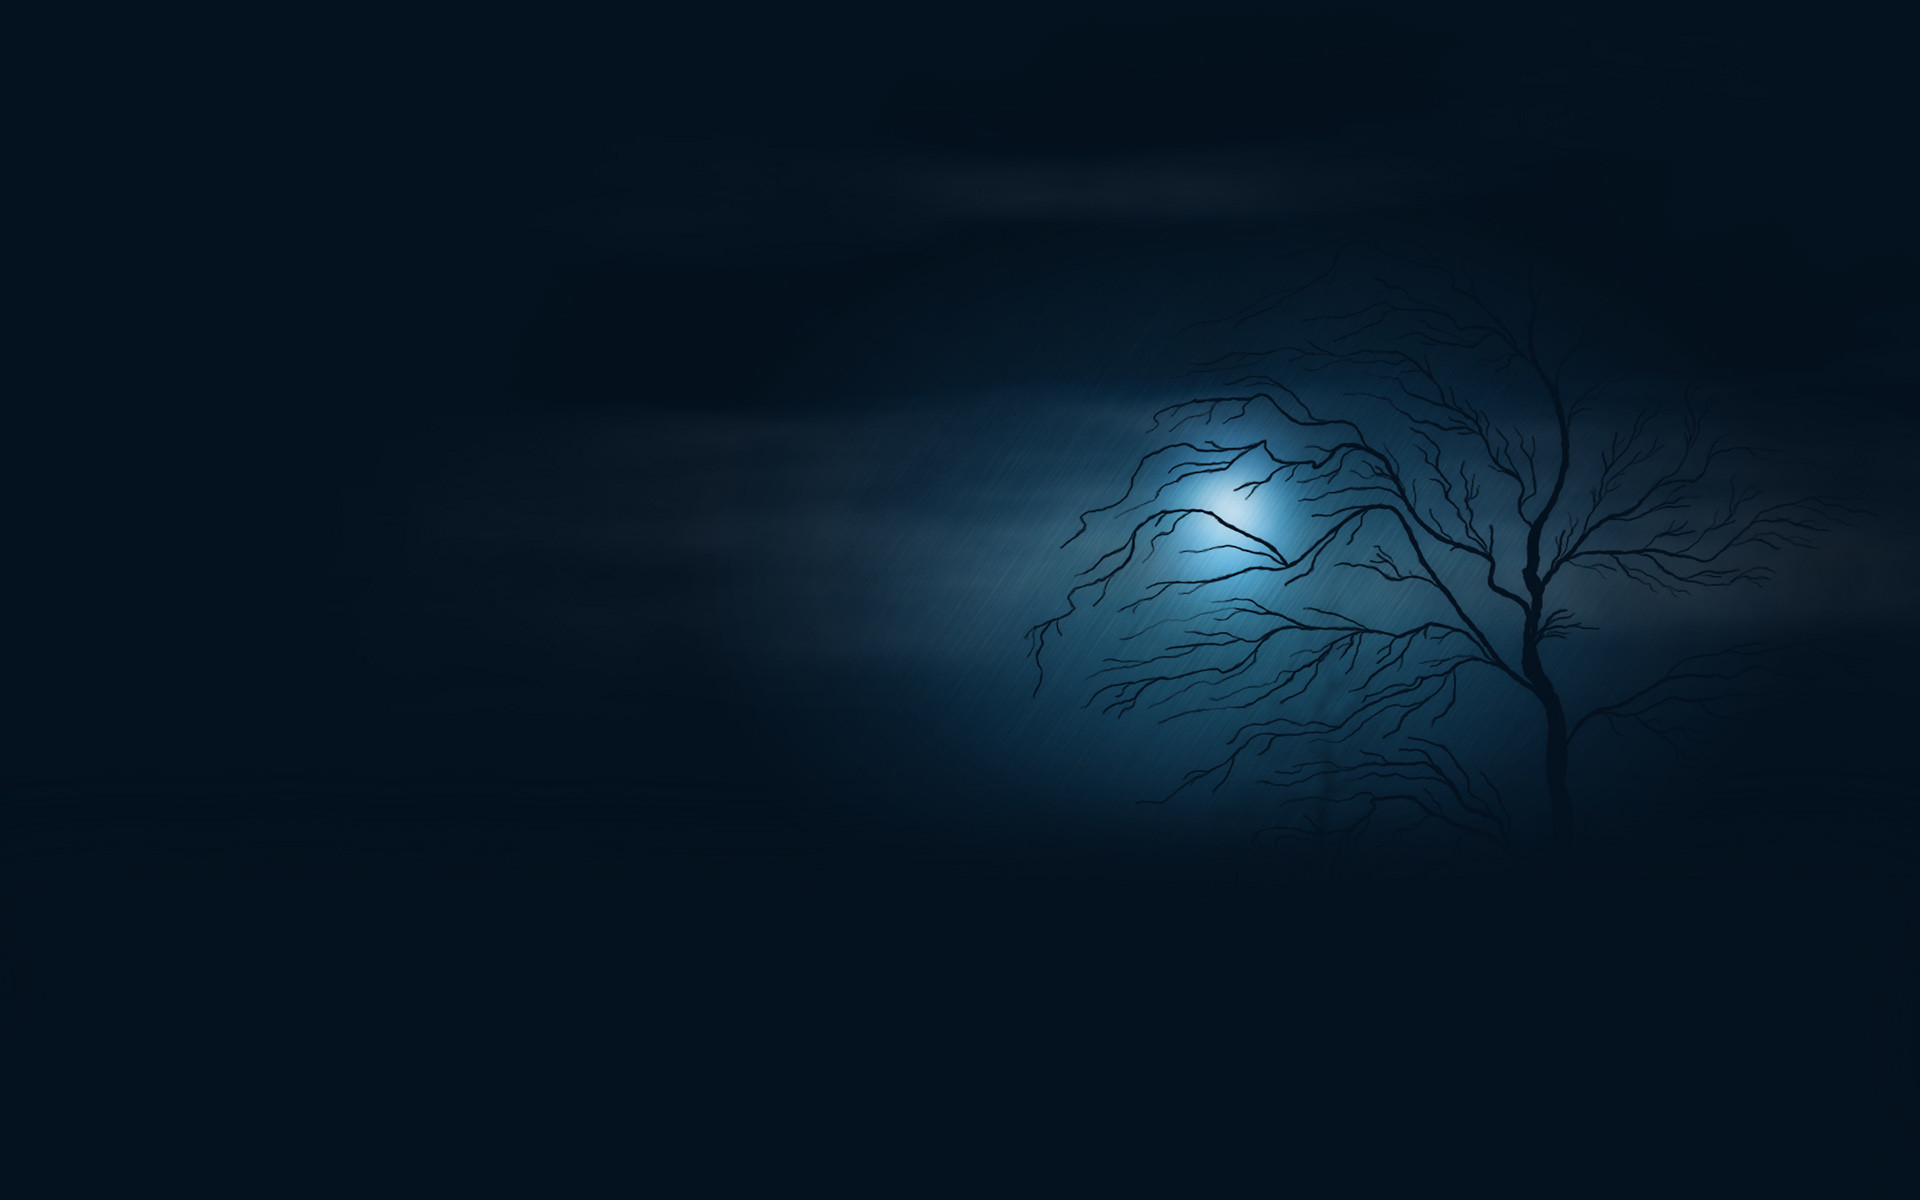 1920x1200 Night Backgrounds | HD Wallpapers | Pictures | Images | Backgrounds .